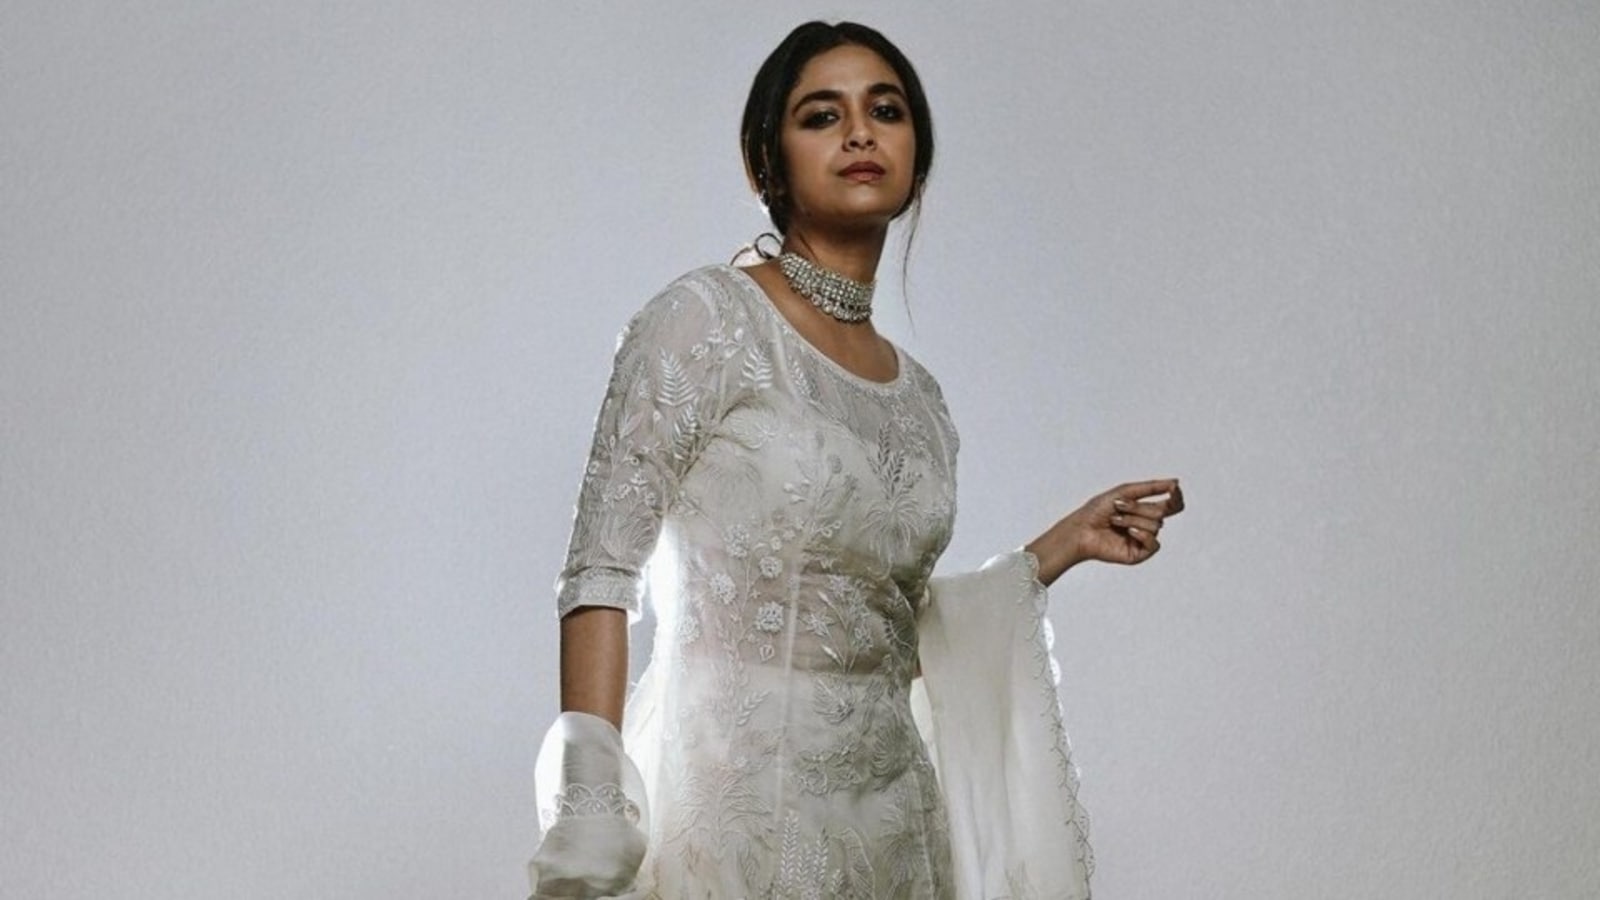 Keerthy Suresh’s embroidered ivory suit is the perfect summer look to beat the heat in style, it costs ₹1 lakh